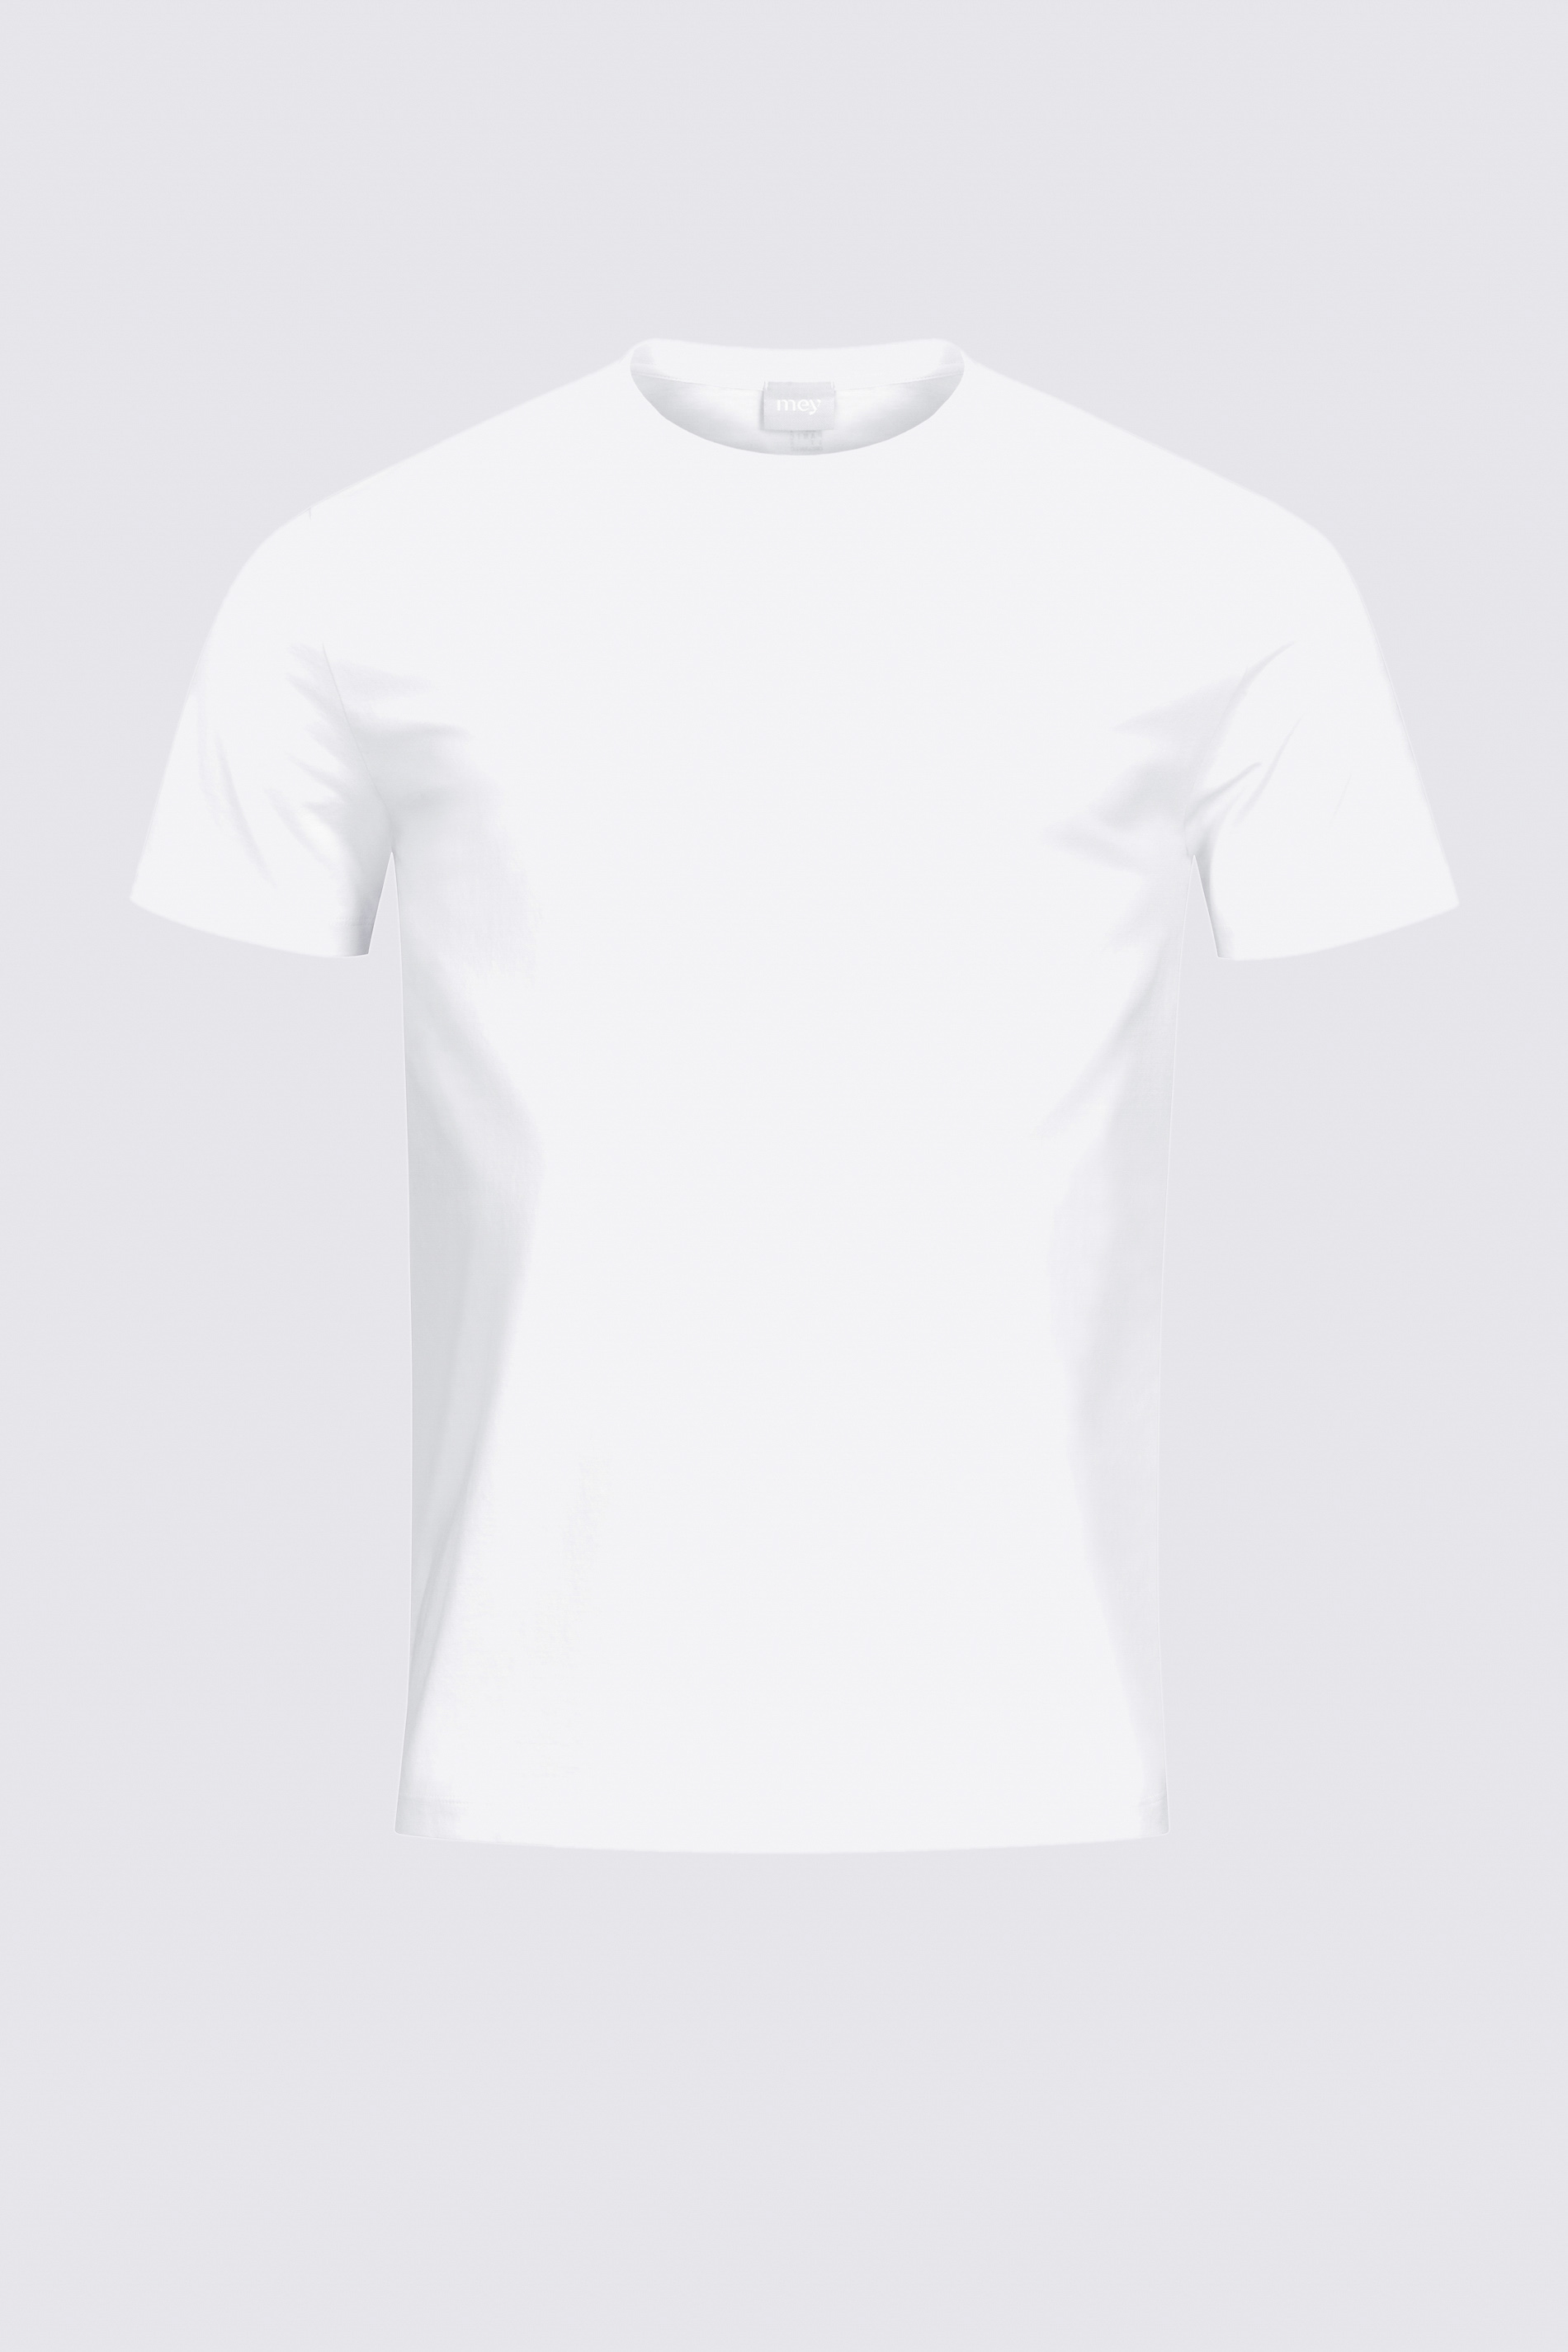 T-shirt Wit Serie Relax Uitknippen | mey®